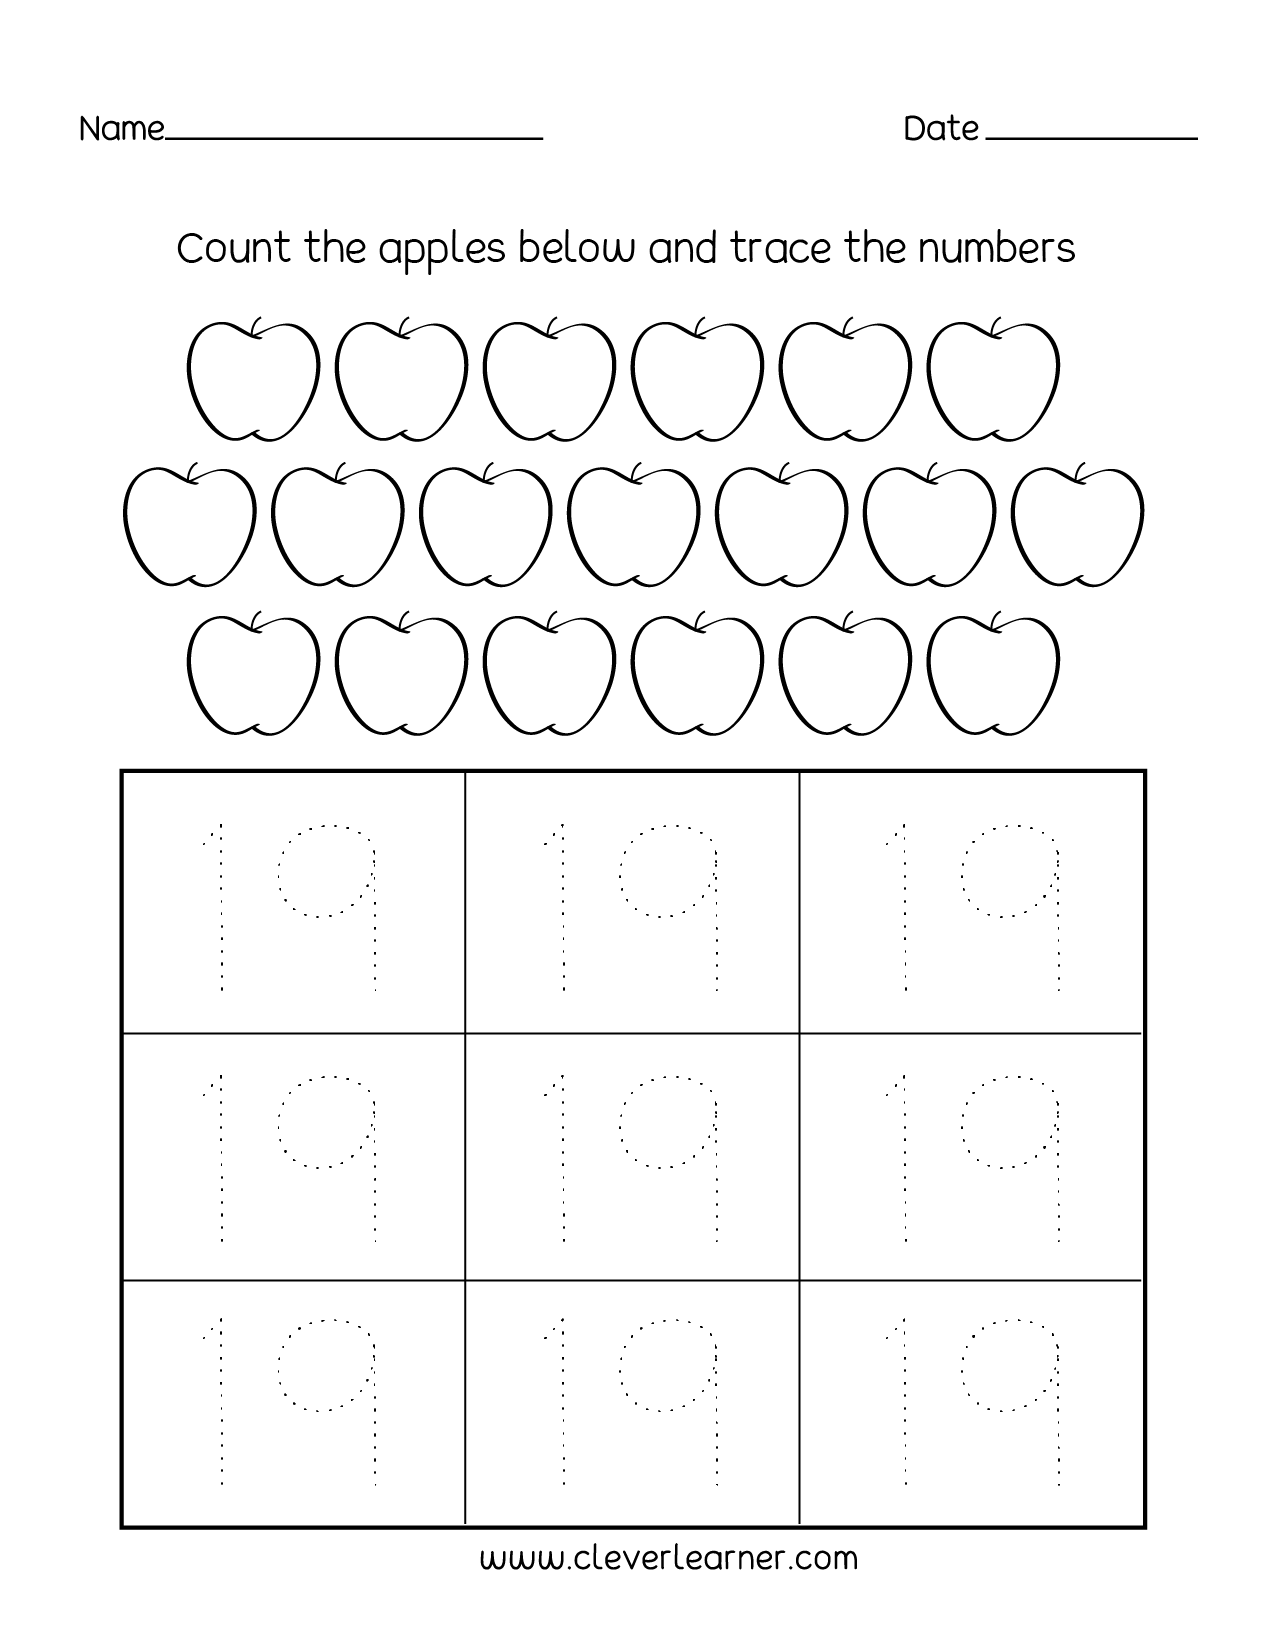 number-19-writing-counting-and-identification-printable-worksheets-for